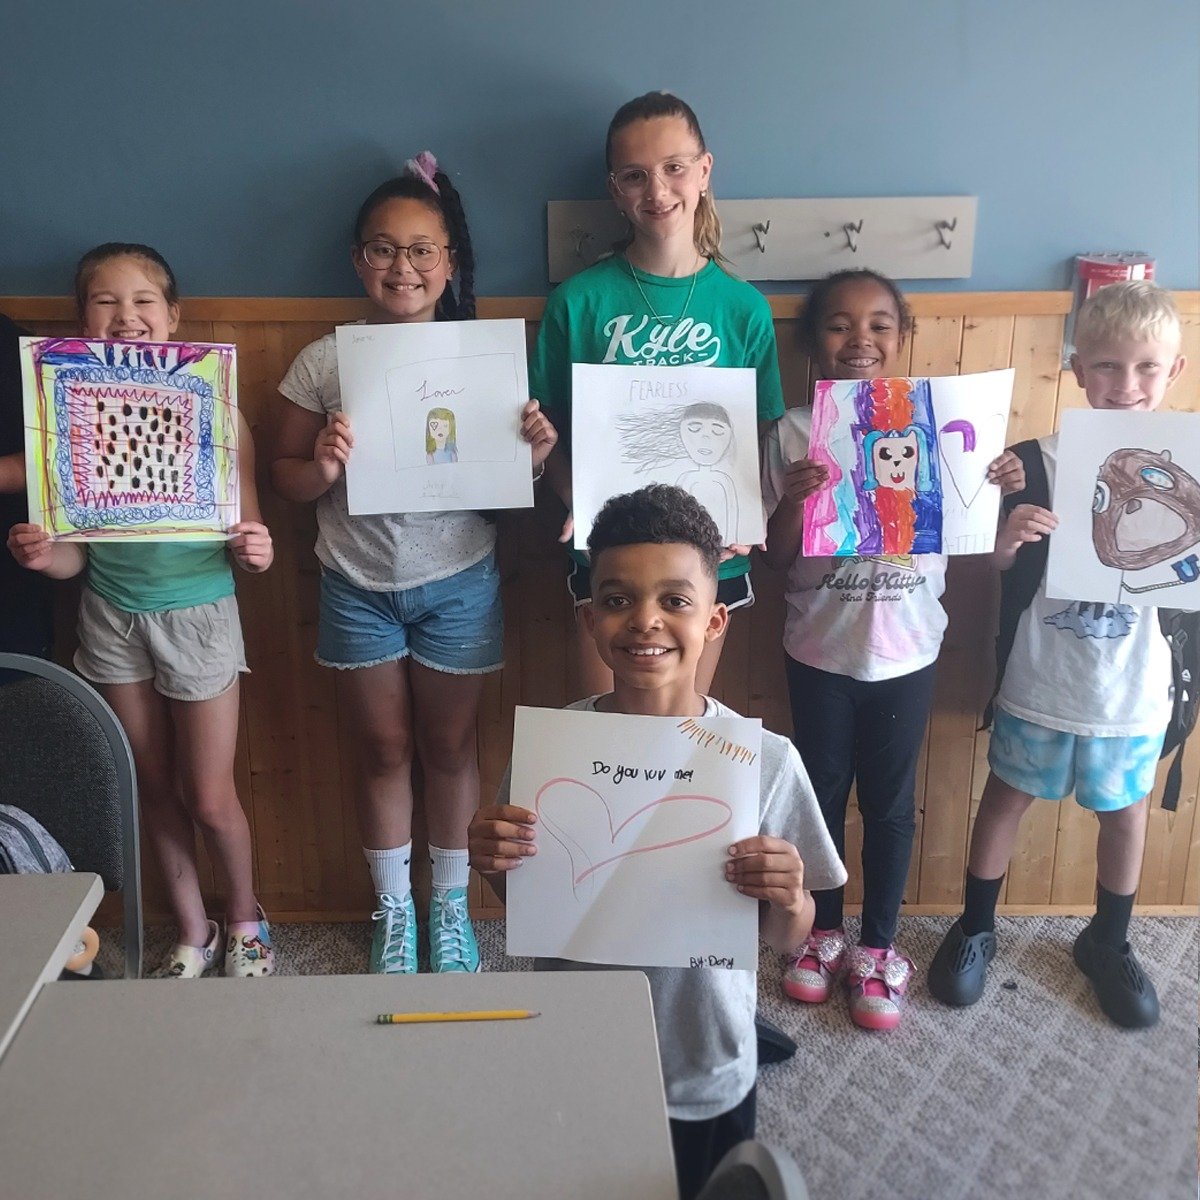 This past week wrapped up this year's monthly art lessons in partnership with the Portage Township YMCA where we provide hands-on art lessons to grades 3-5 in the Portage Y after school program.

For the May lesson, CAC outreach instructor Emily Blos